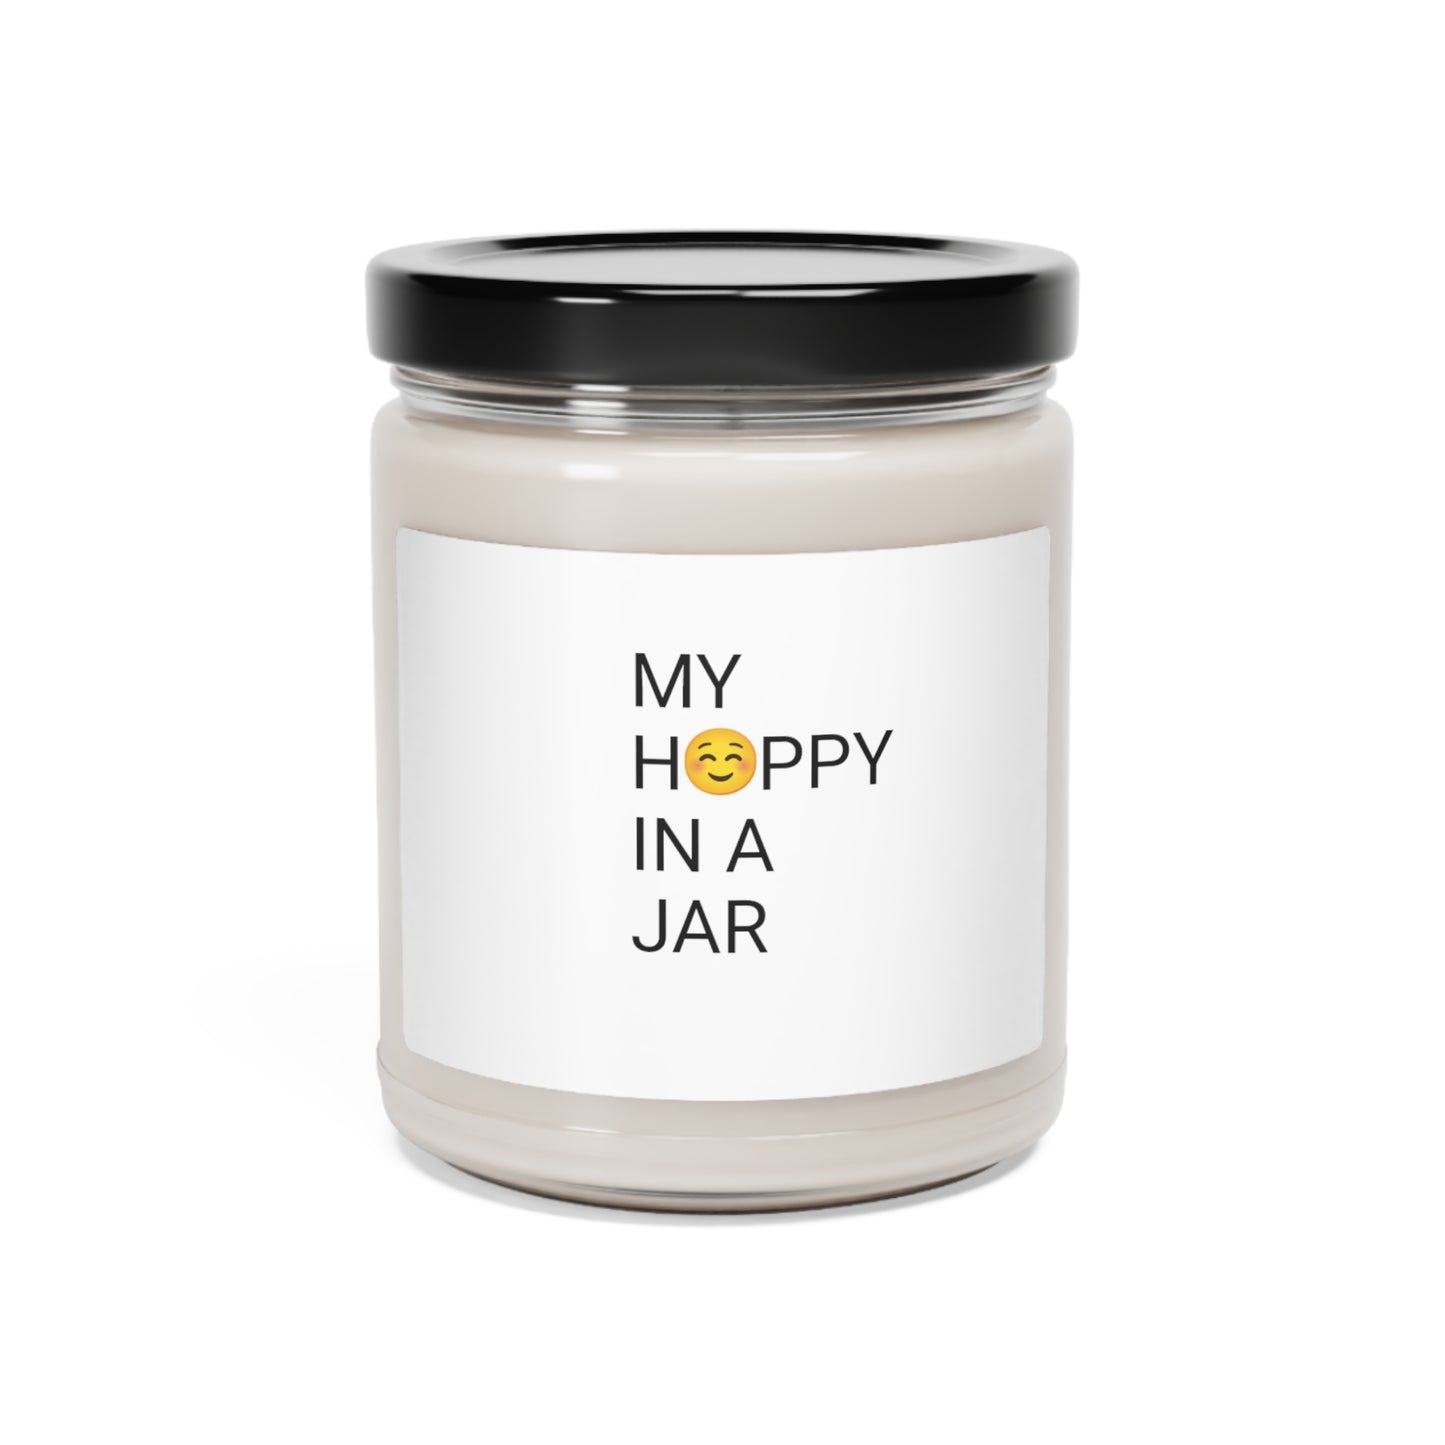 BOSS LADY DENEQUIA " MY HAPPY IN A JAR " Scented Soy Candle, 9oz